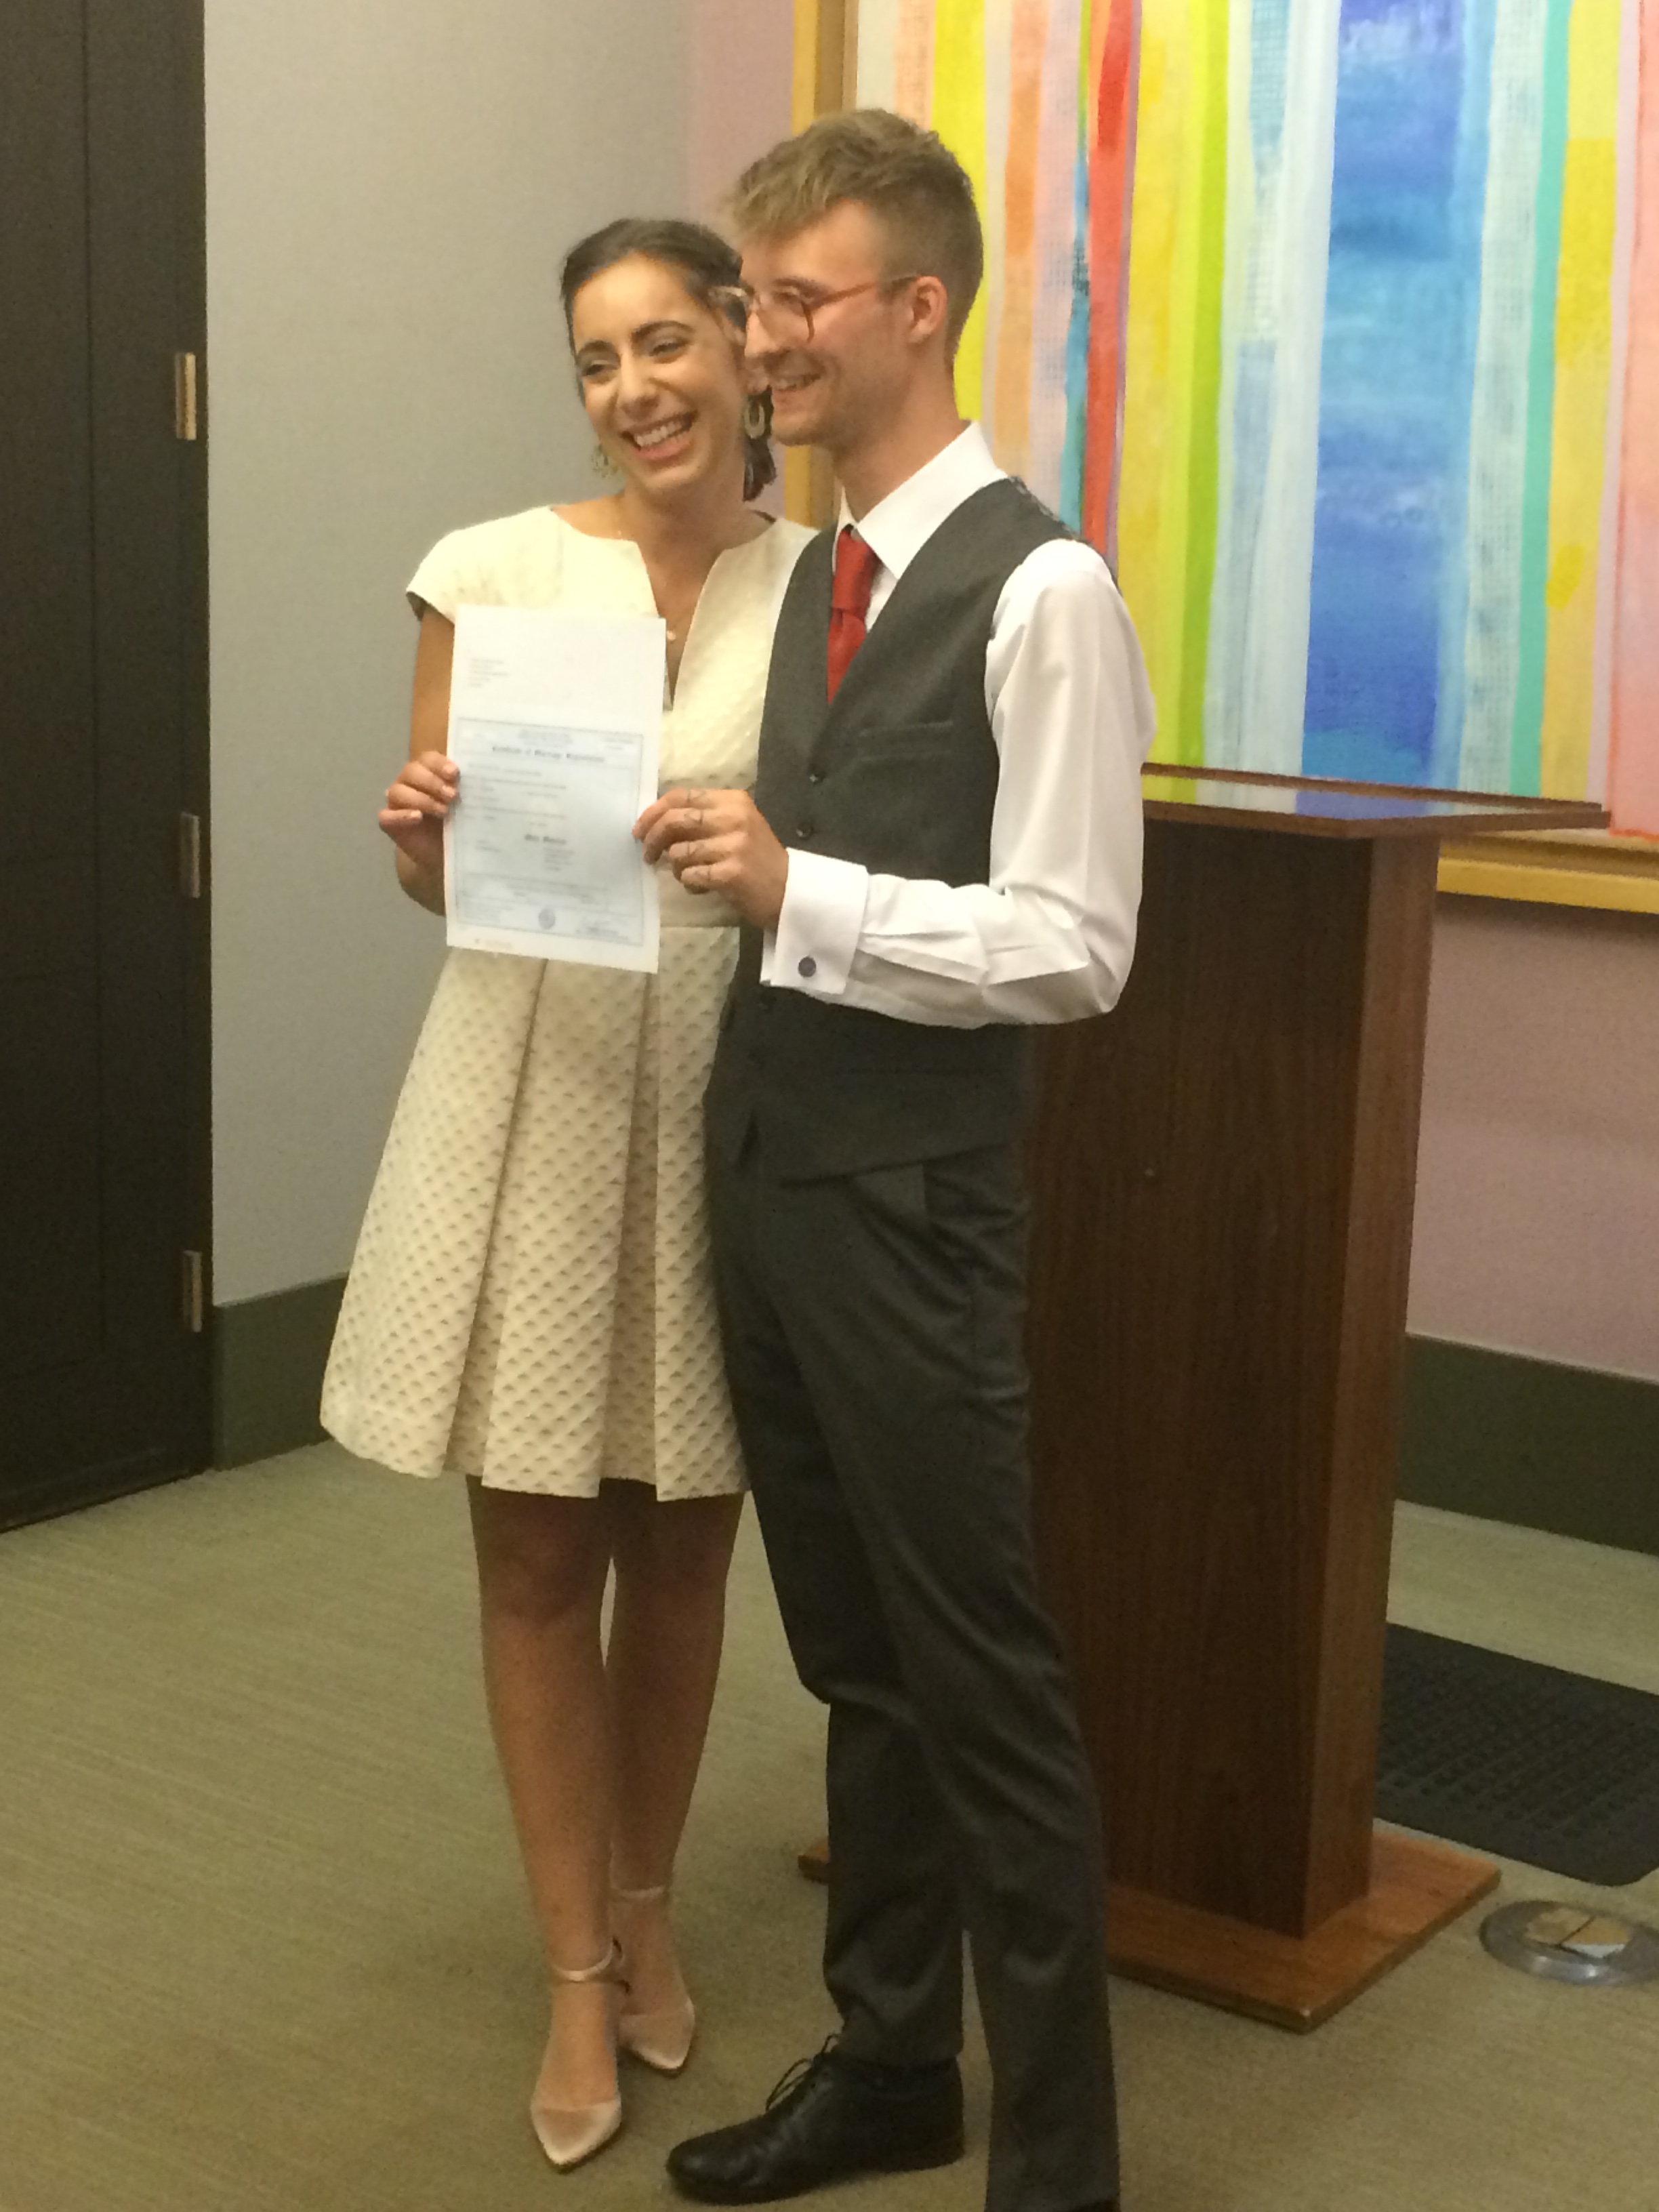 It became official on November 5, 2015!  Congratulations Natascha and Frank!